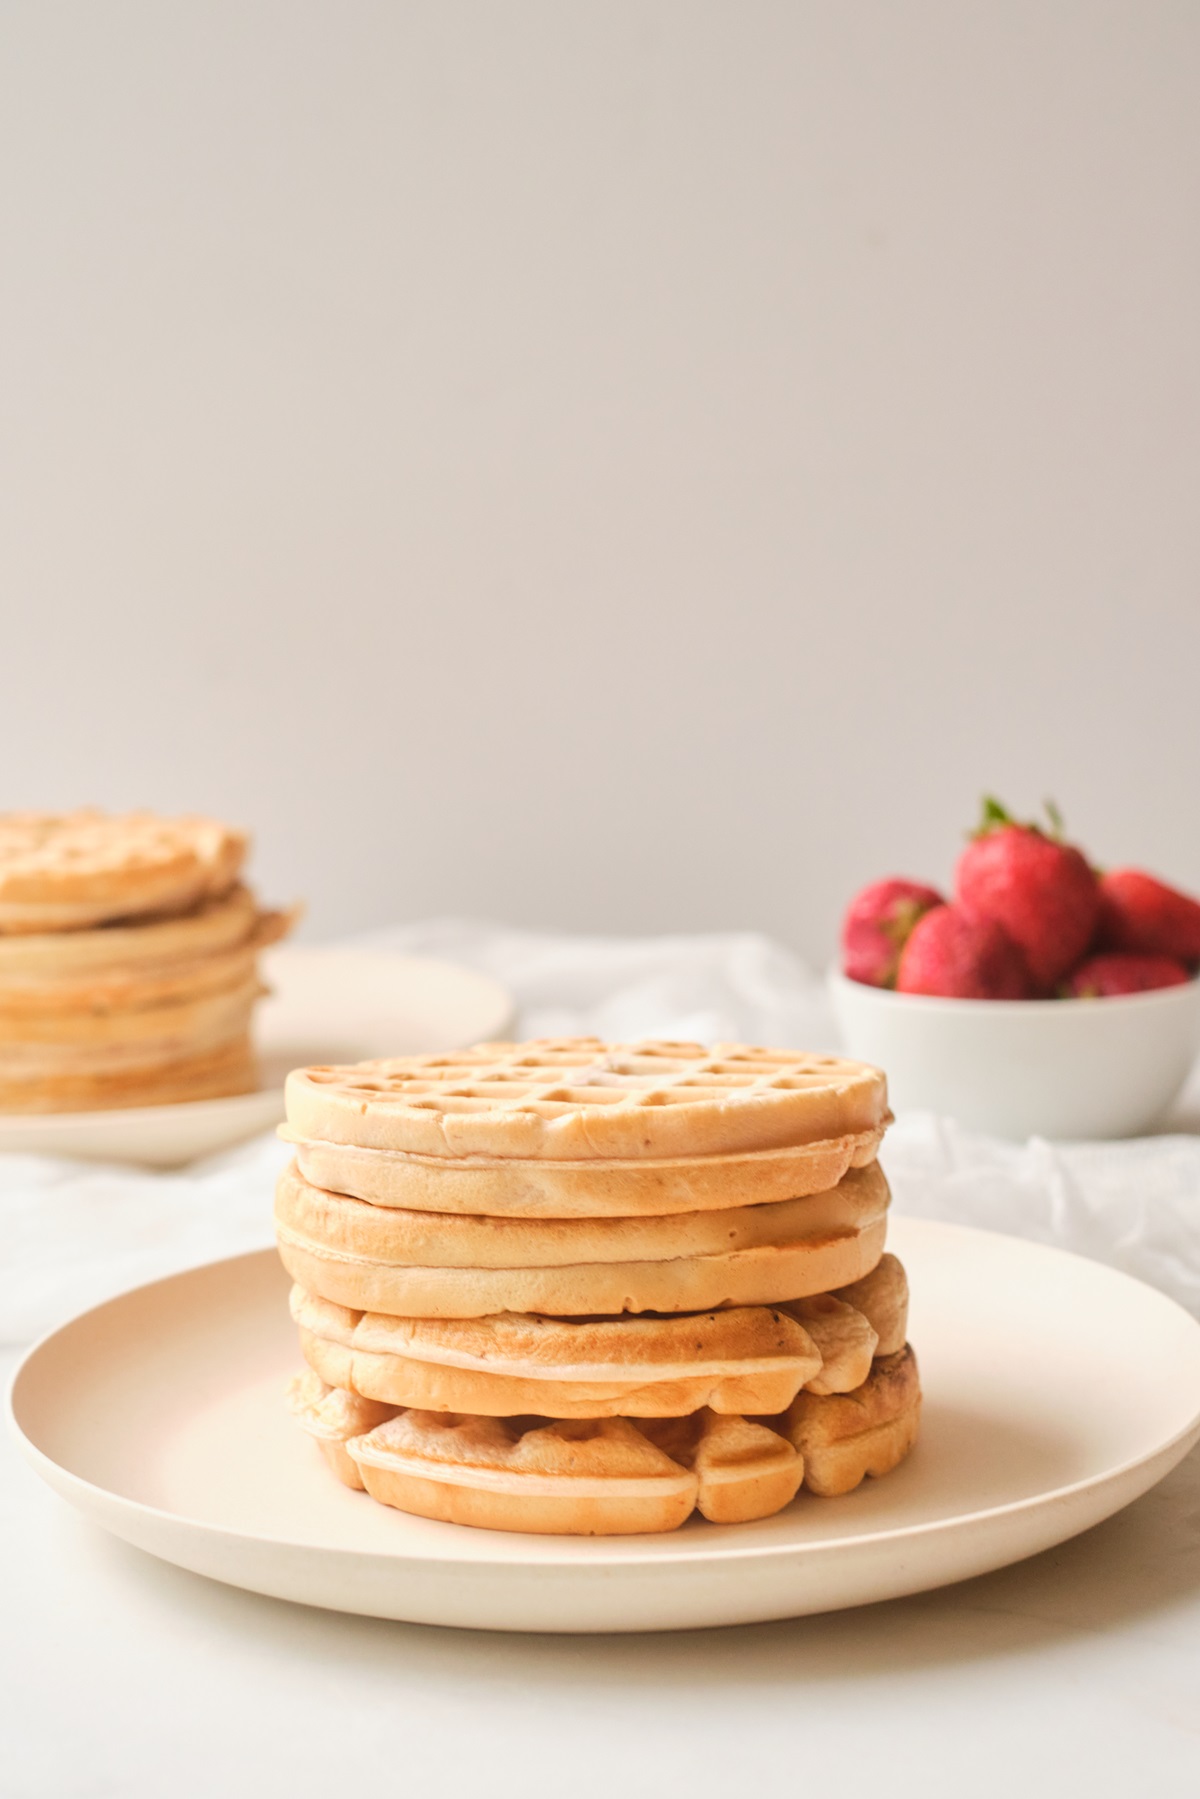 Plain waffles stacked on top in a white plate.